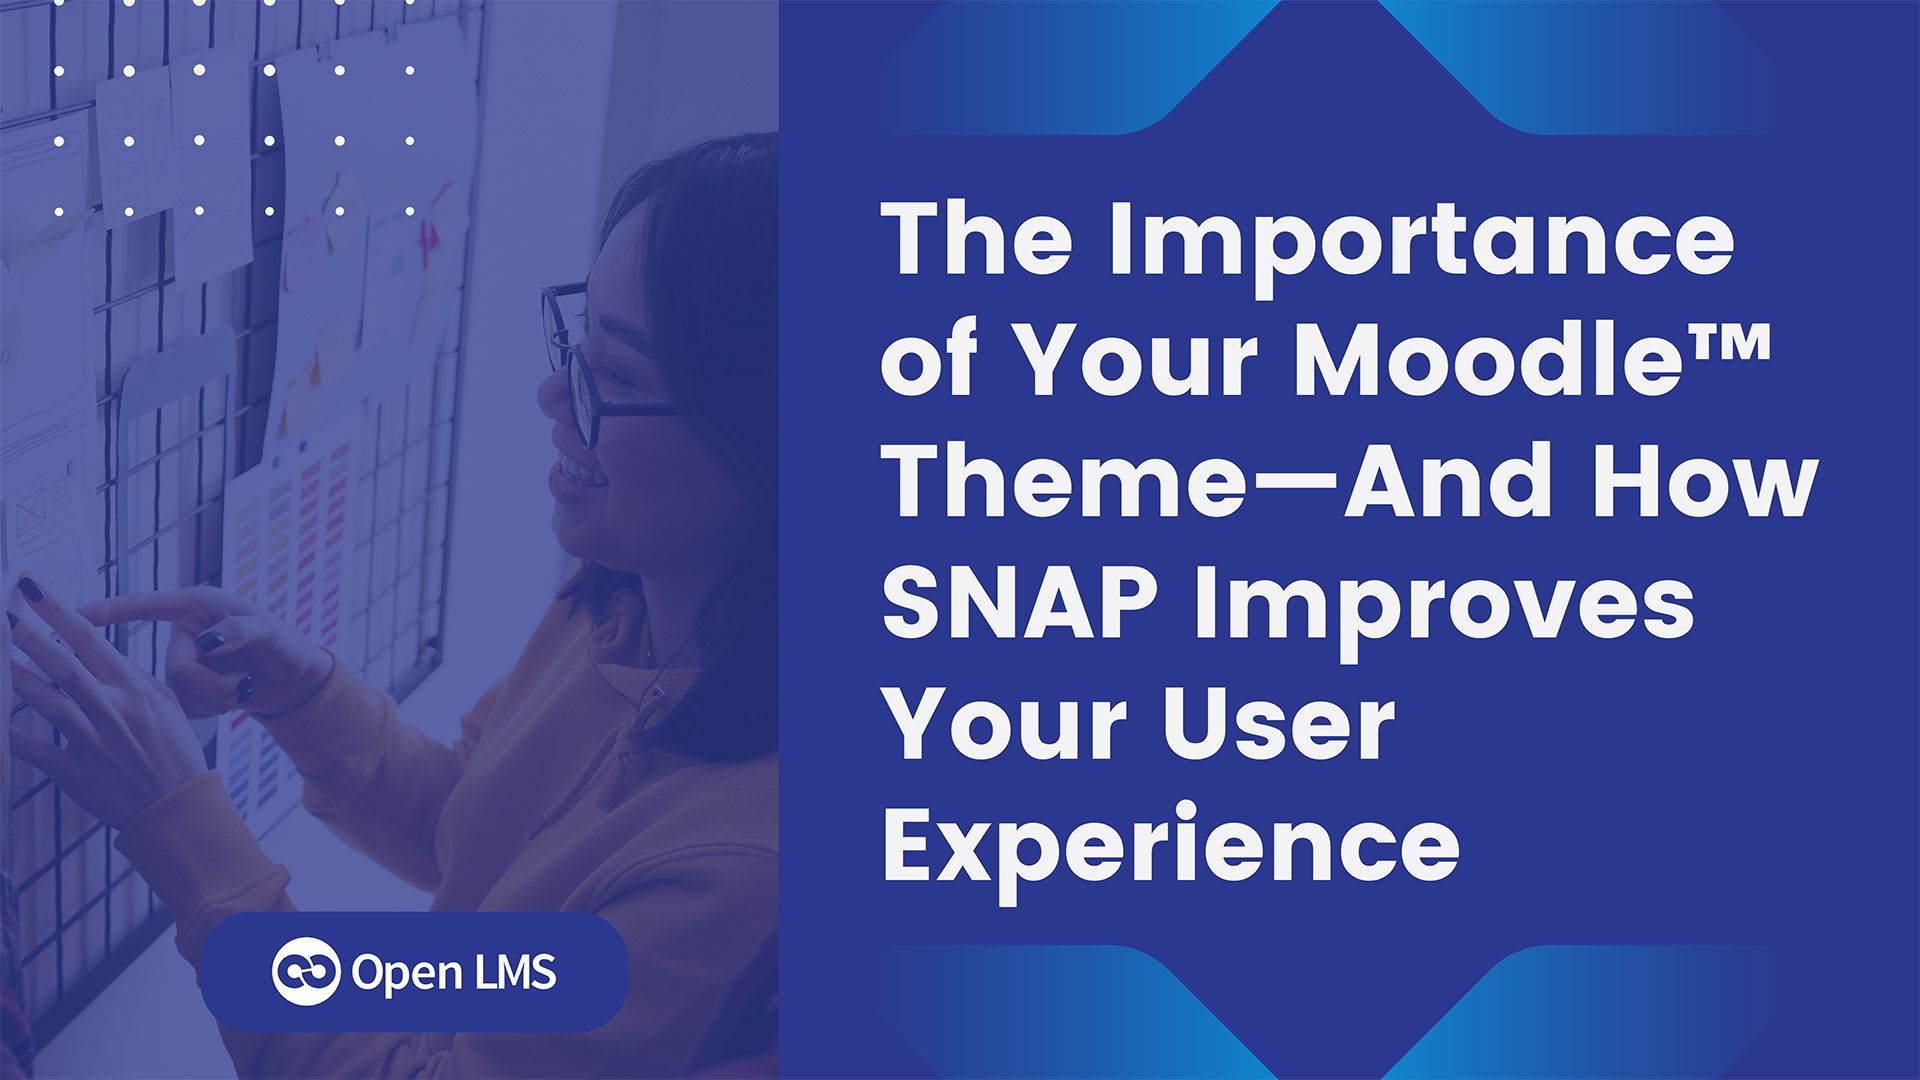 The Importance of Your Moodle™ Theme—And How SNAP Improves Your User Experience